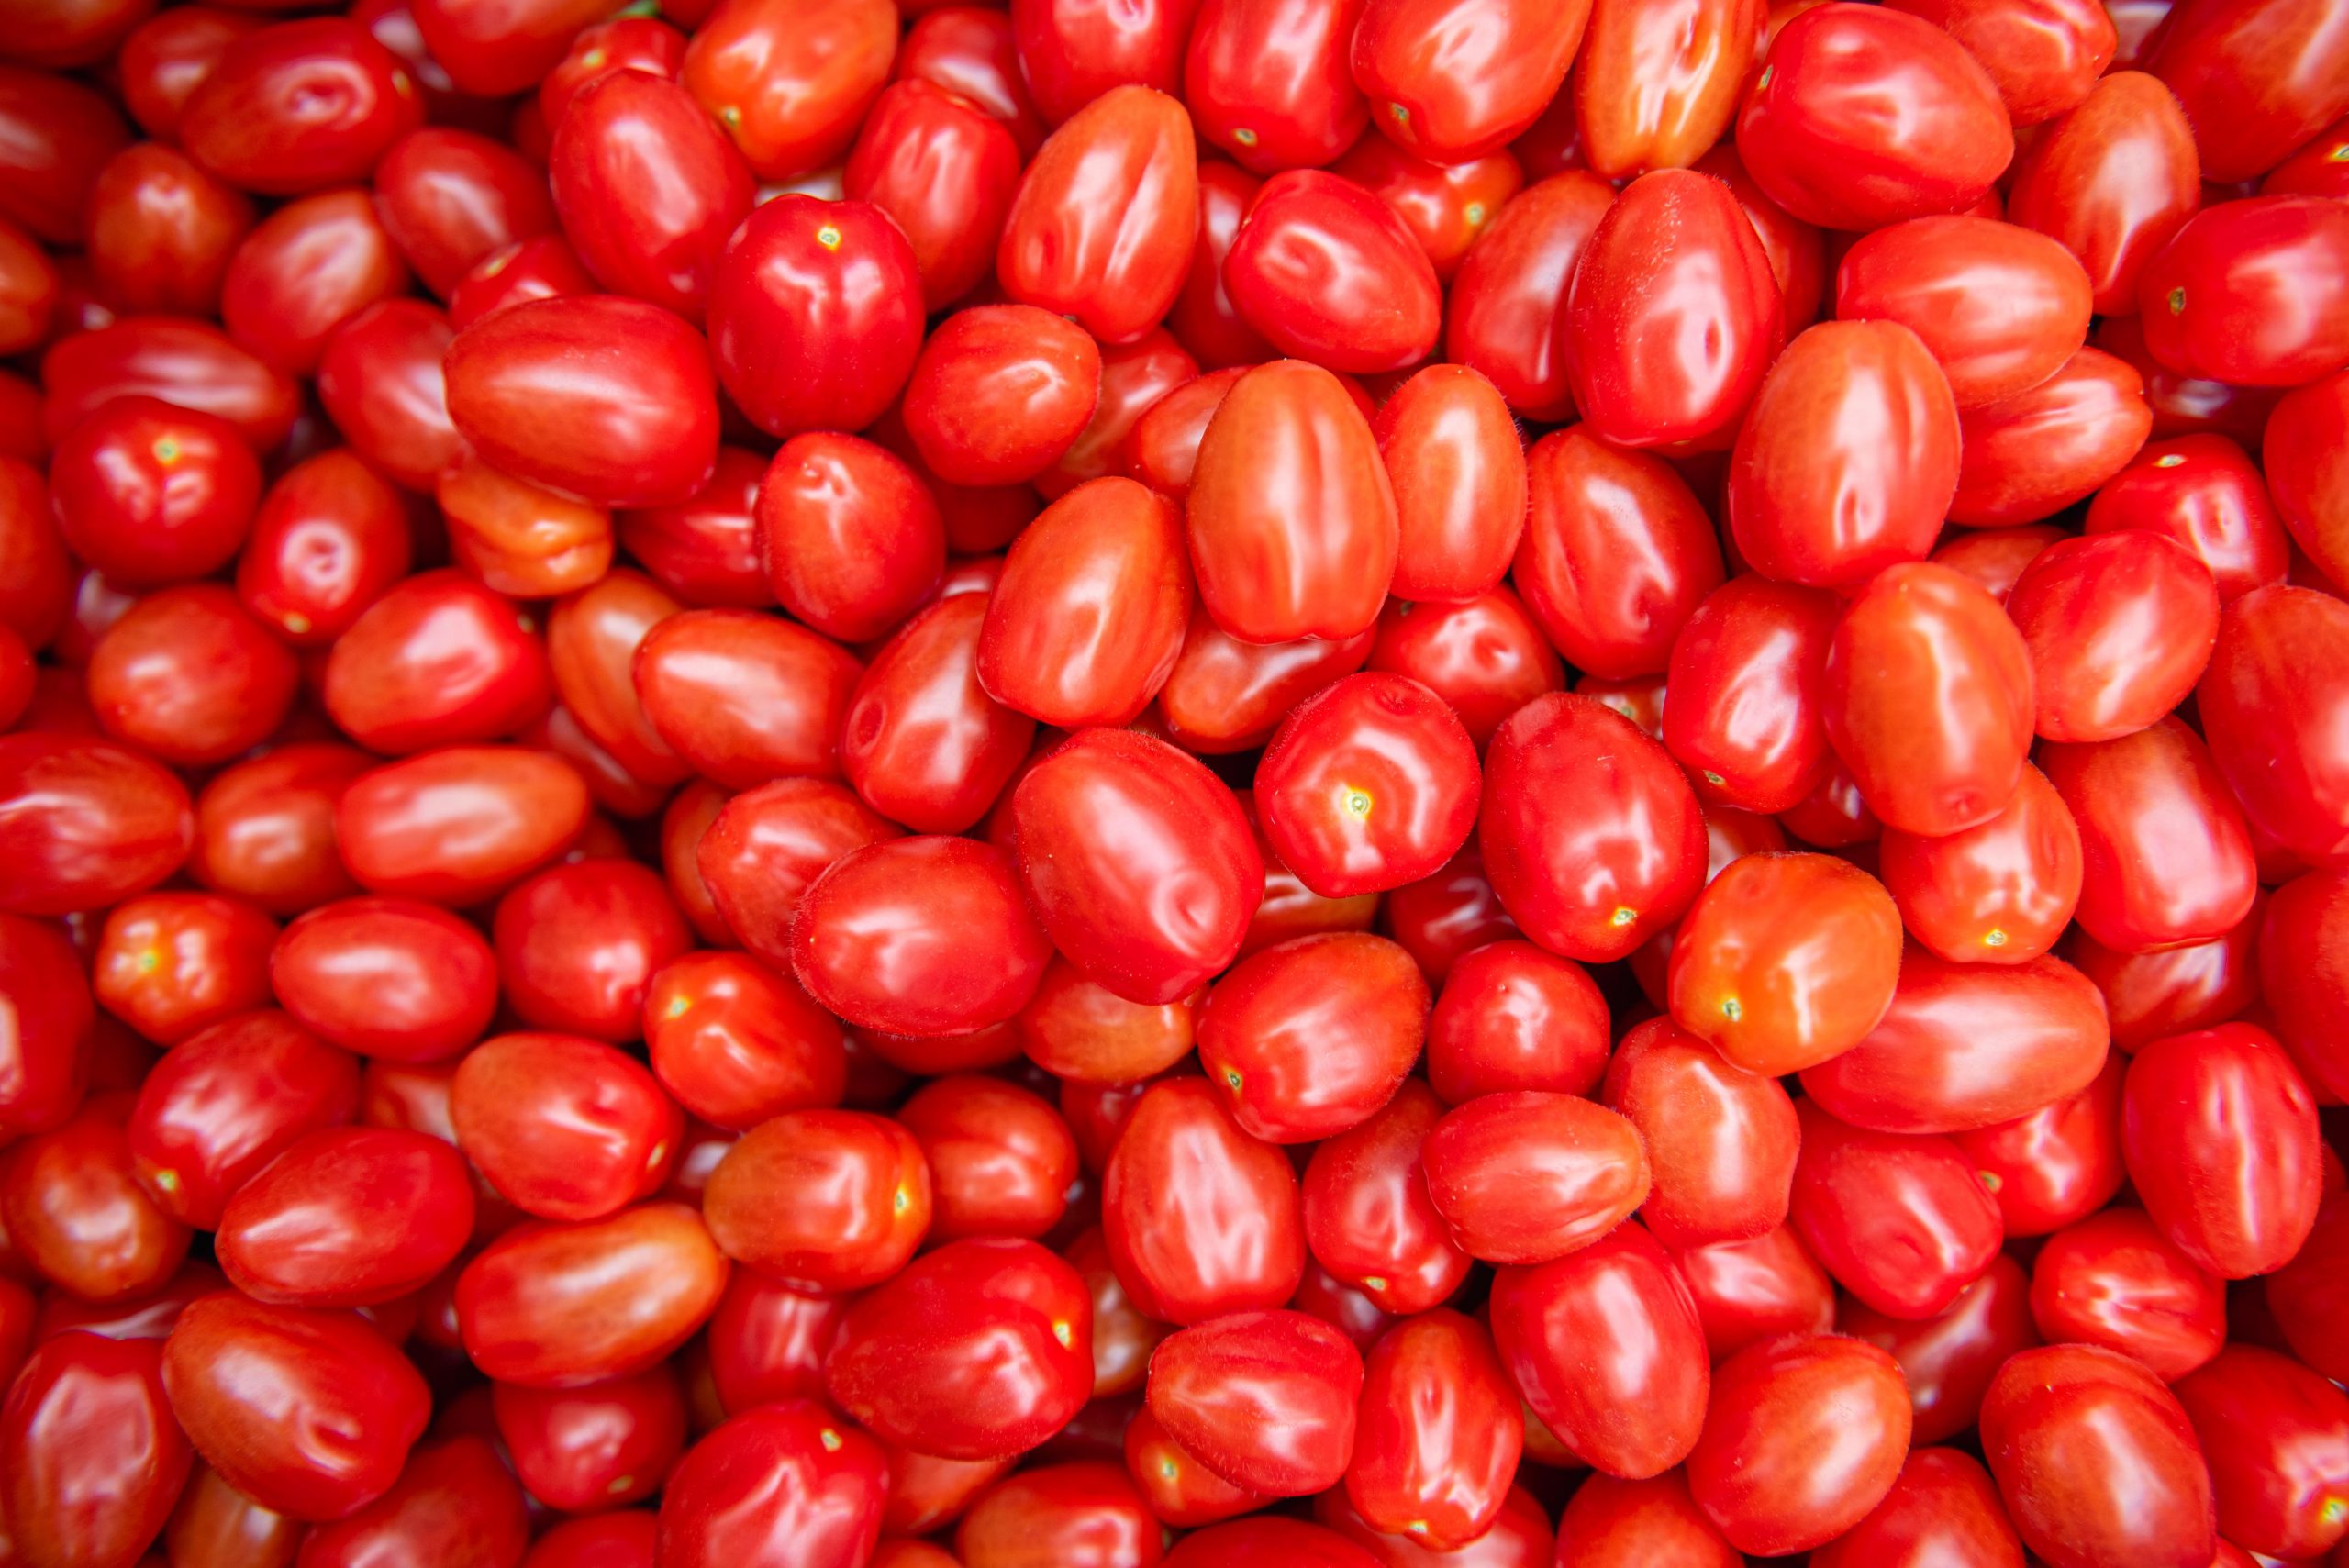 Most common tomato related questions answered!